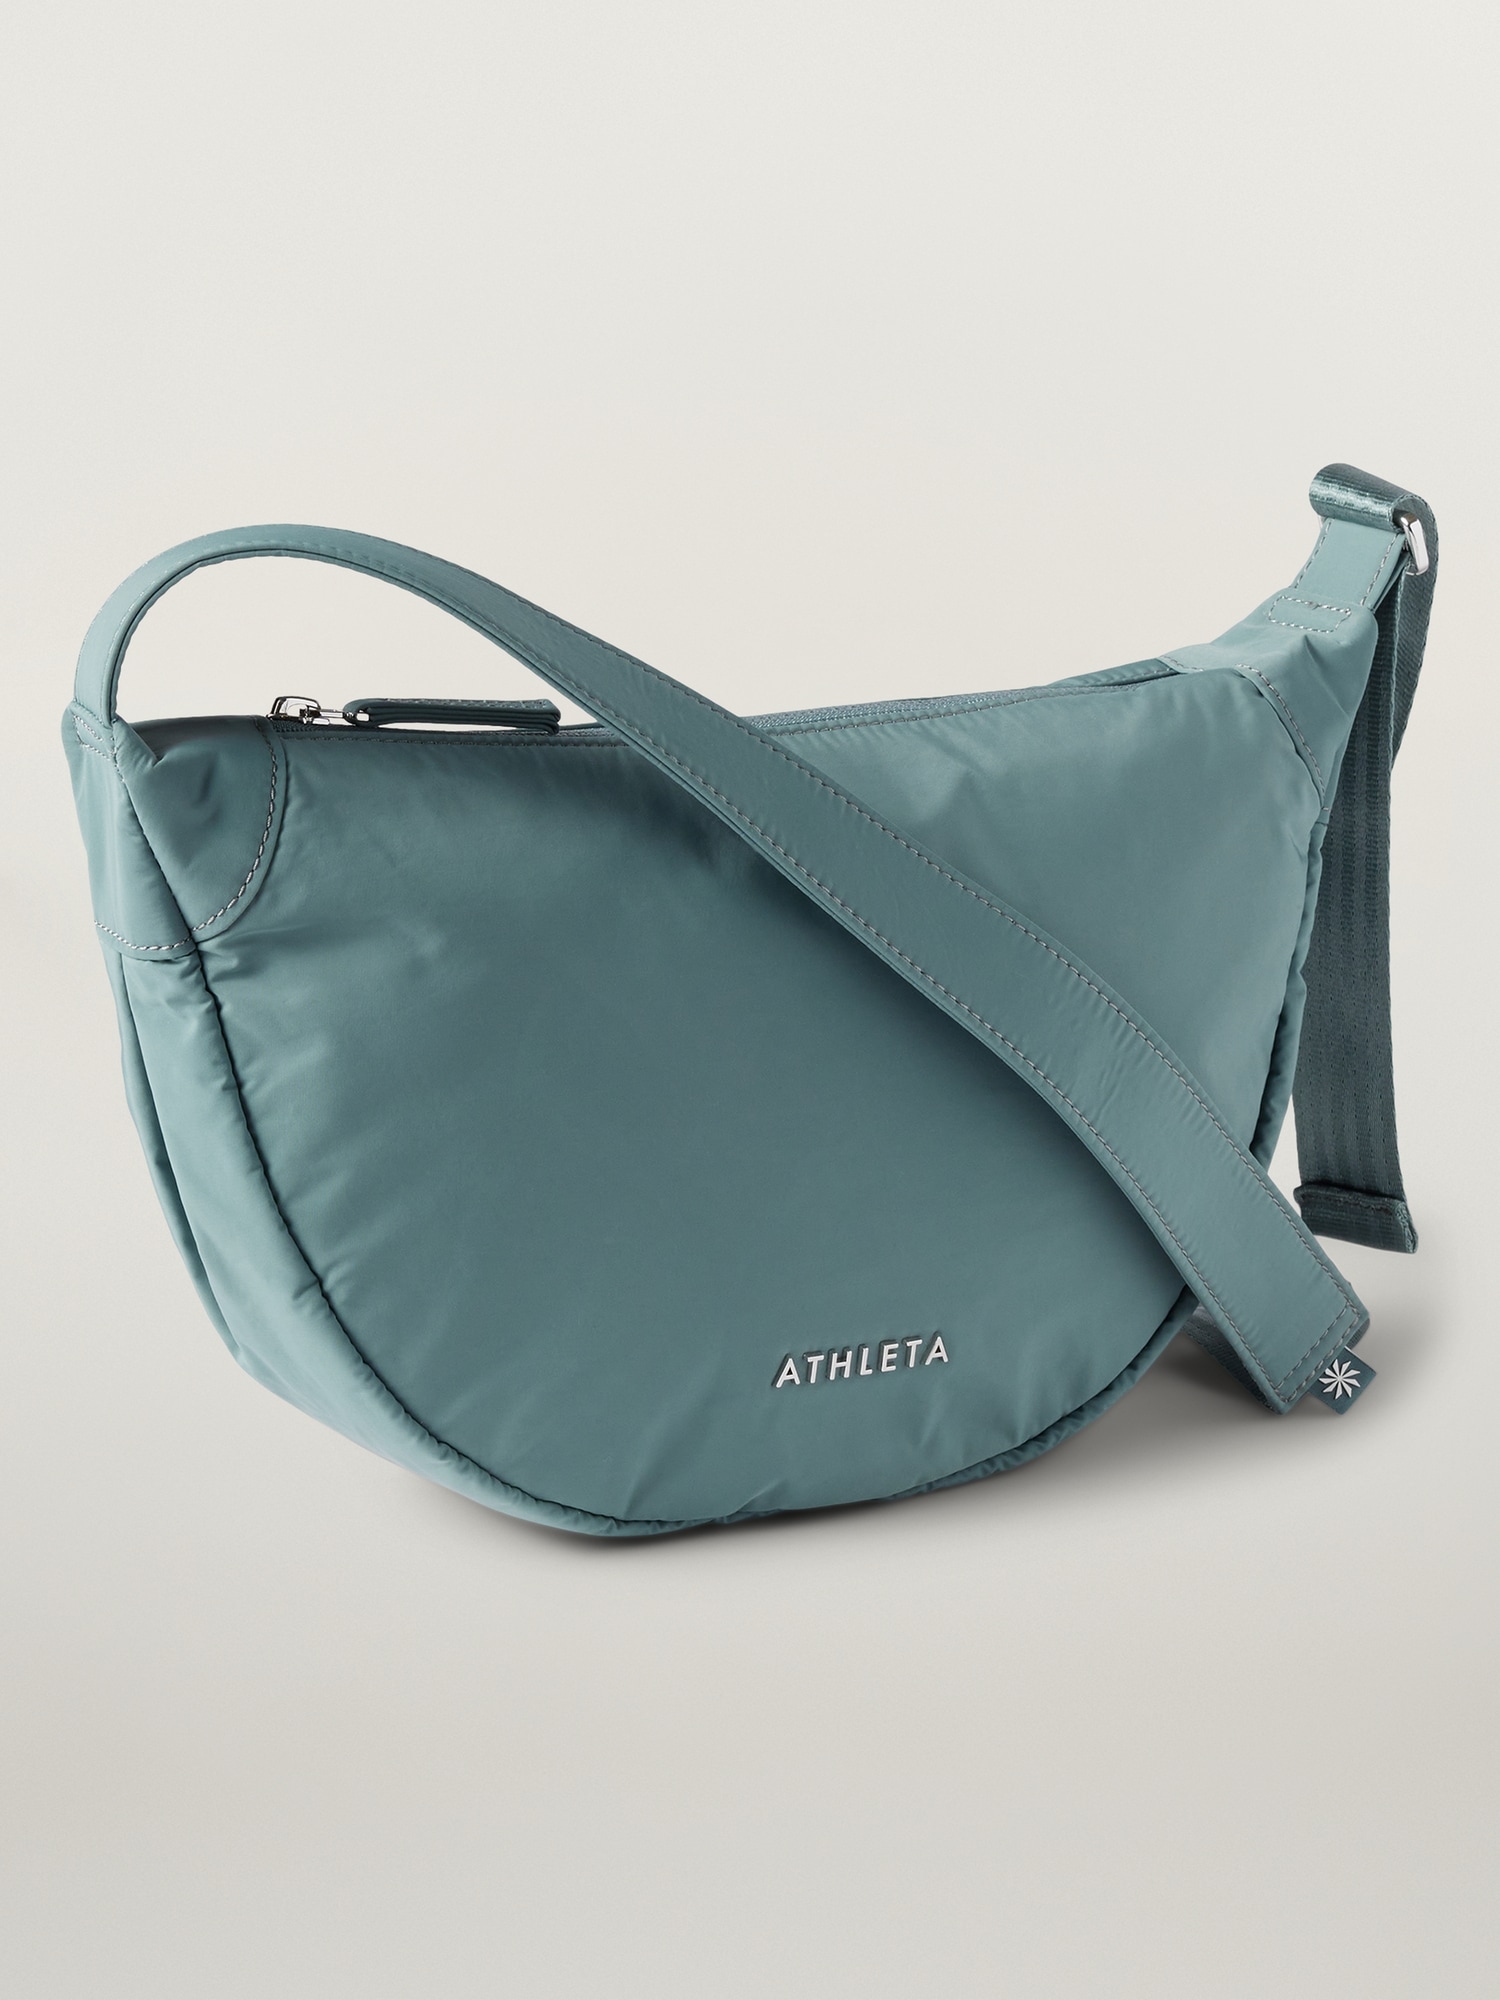 Athleta All About Crossbody Bag In Green